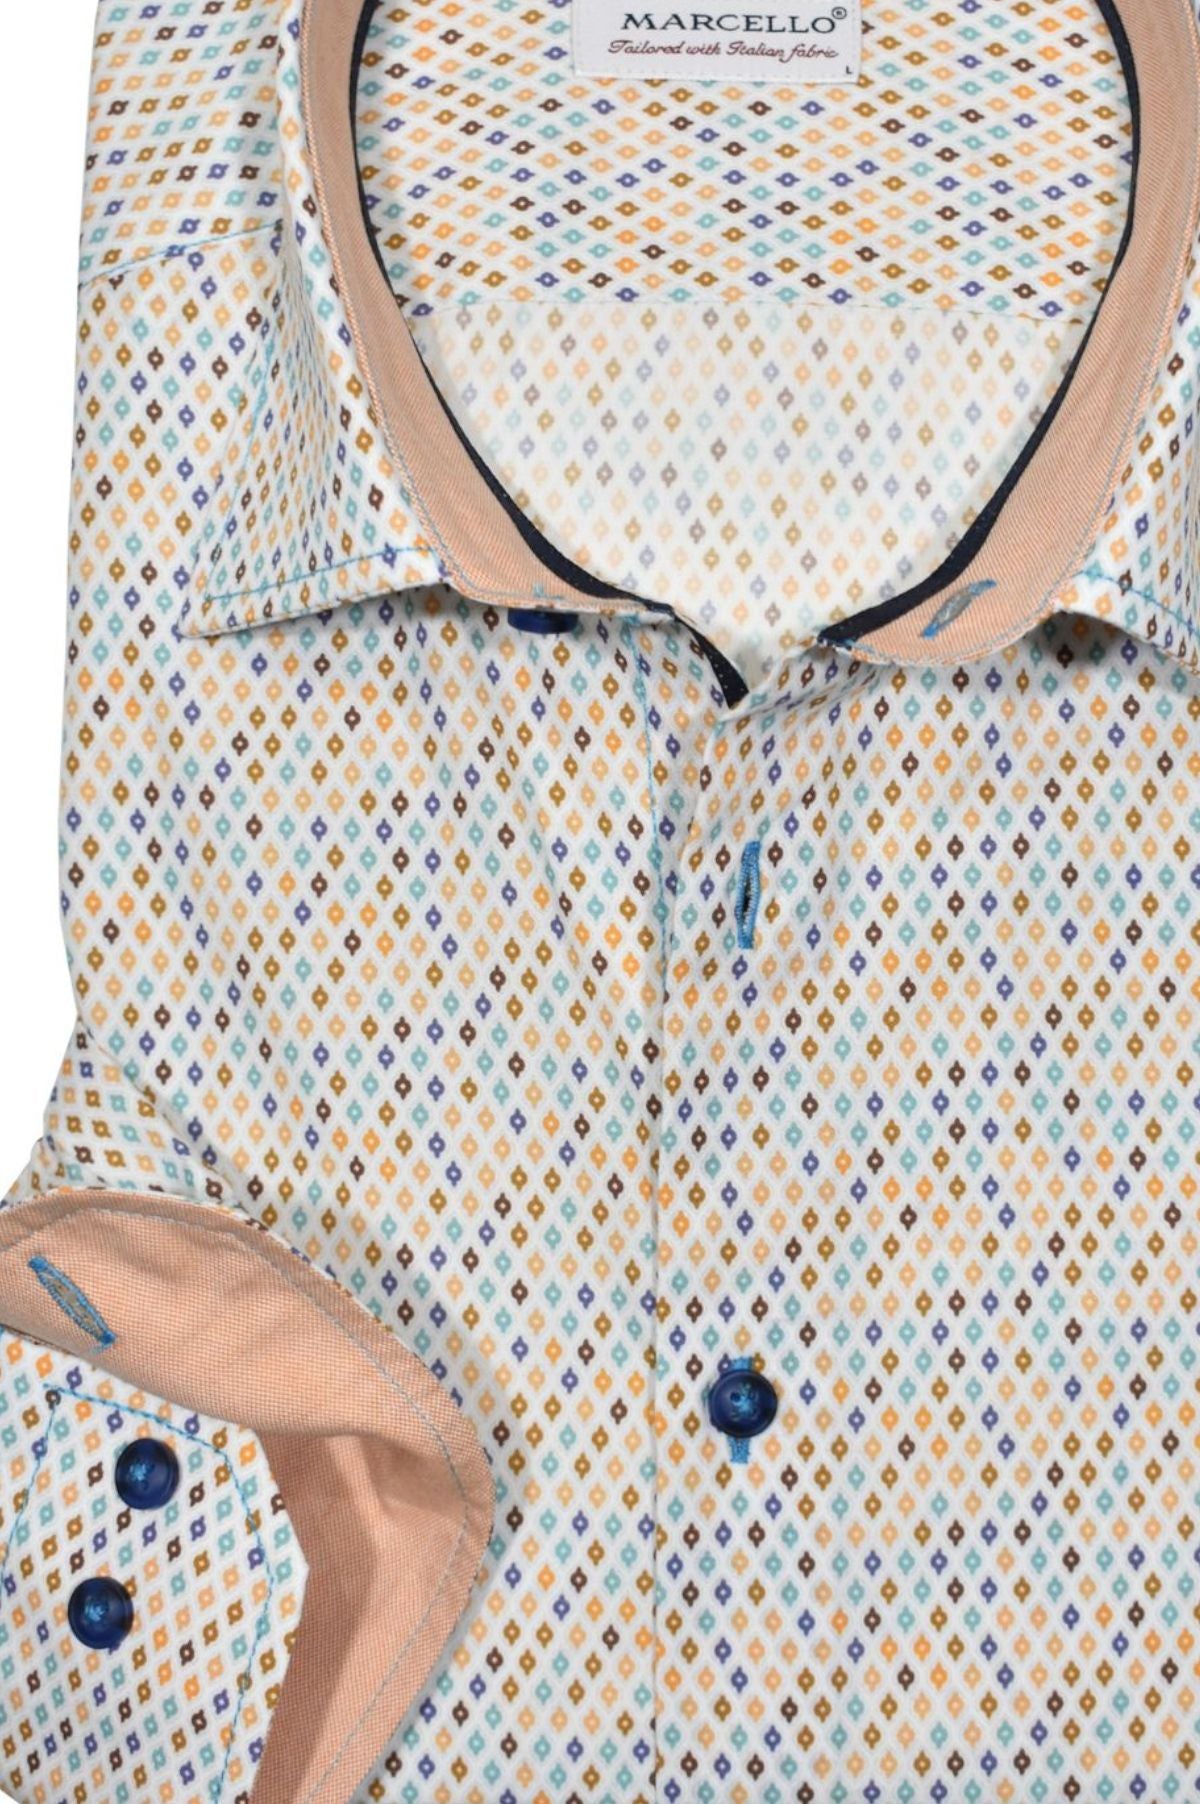 This classic cotton shirt will quickly become a wardrobe staple. Featuring vertical geometric diamonds in multiple colors, and nice accent trim fabric and contrast neck band piping, its versatility and comfort will make it your favorite go-to piece. Keep it casual and stylish all at once!